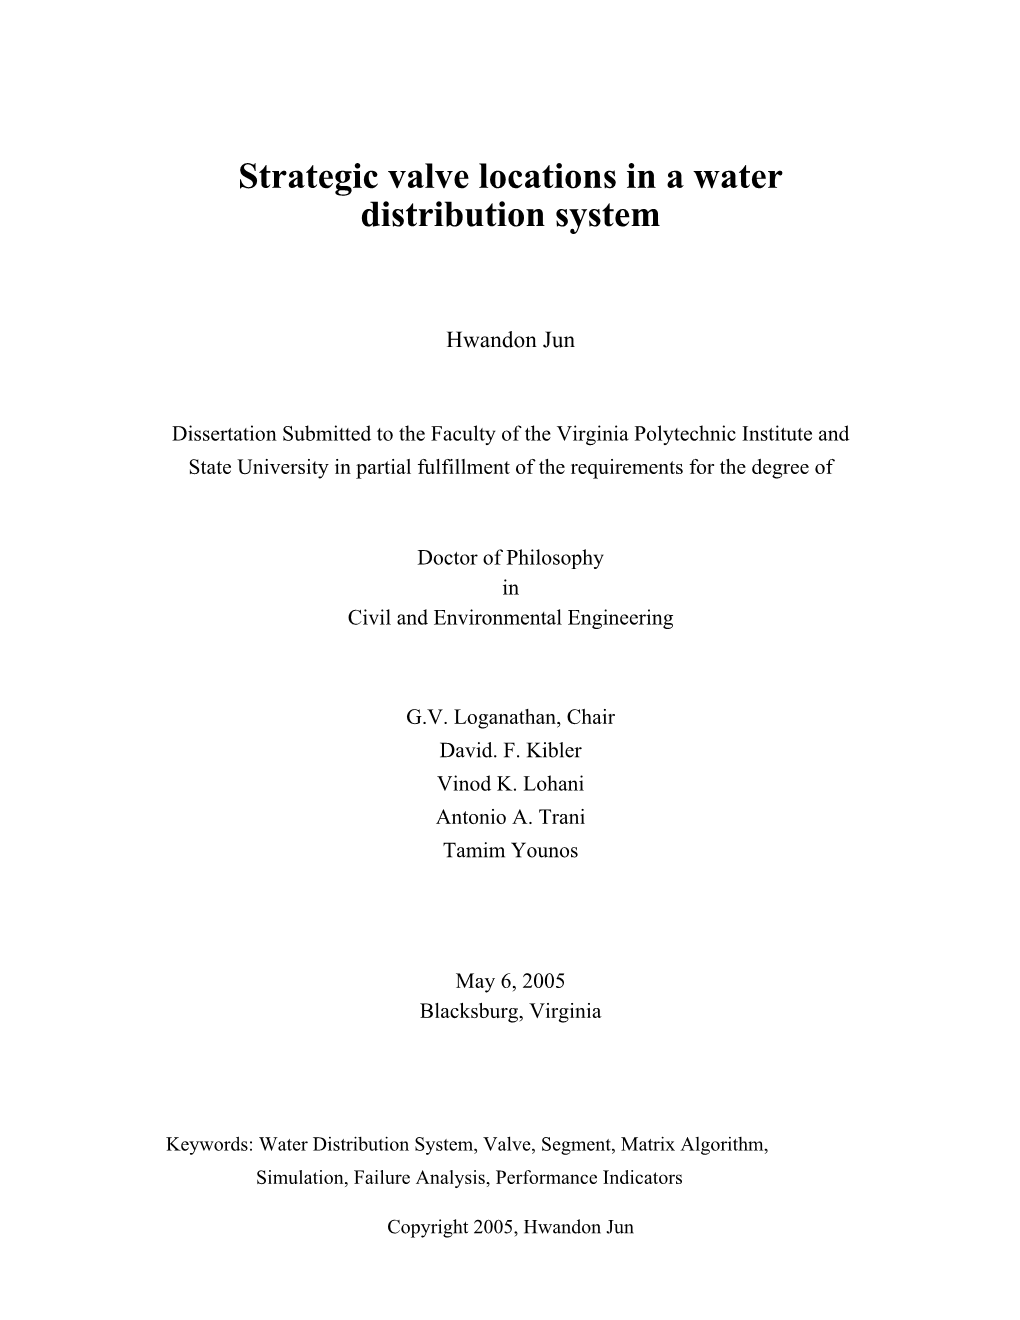 Strategic Valve Locations in a Water Distribution System